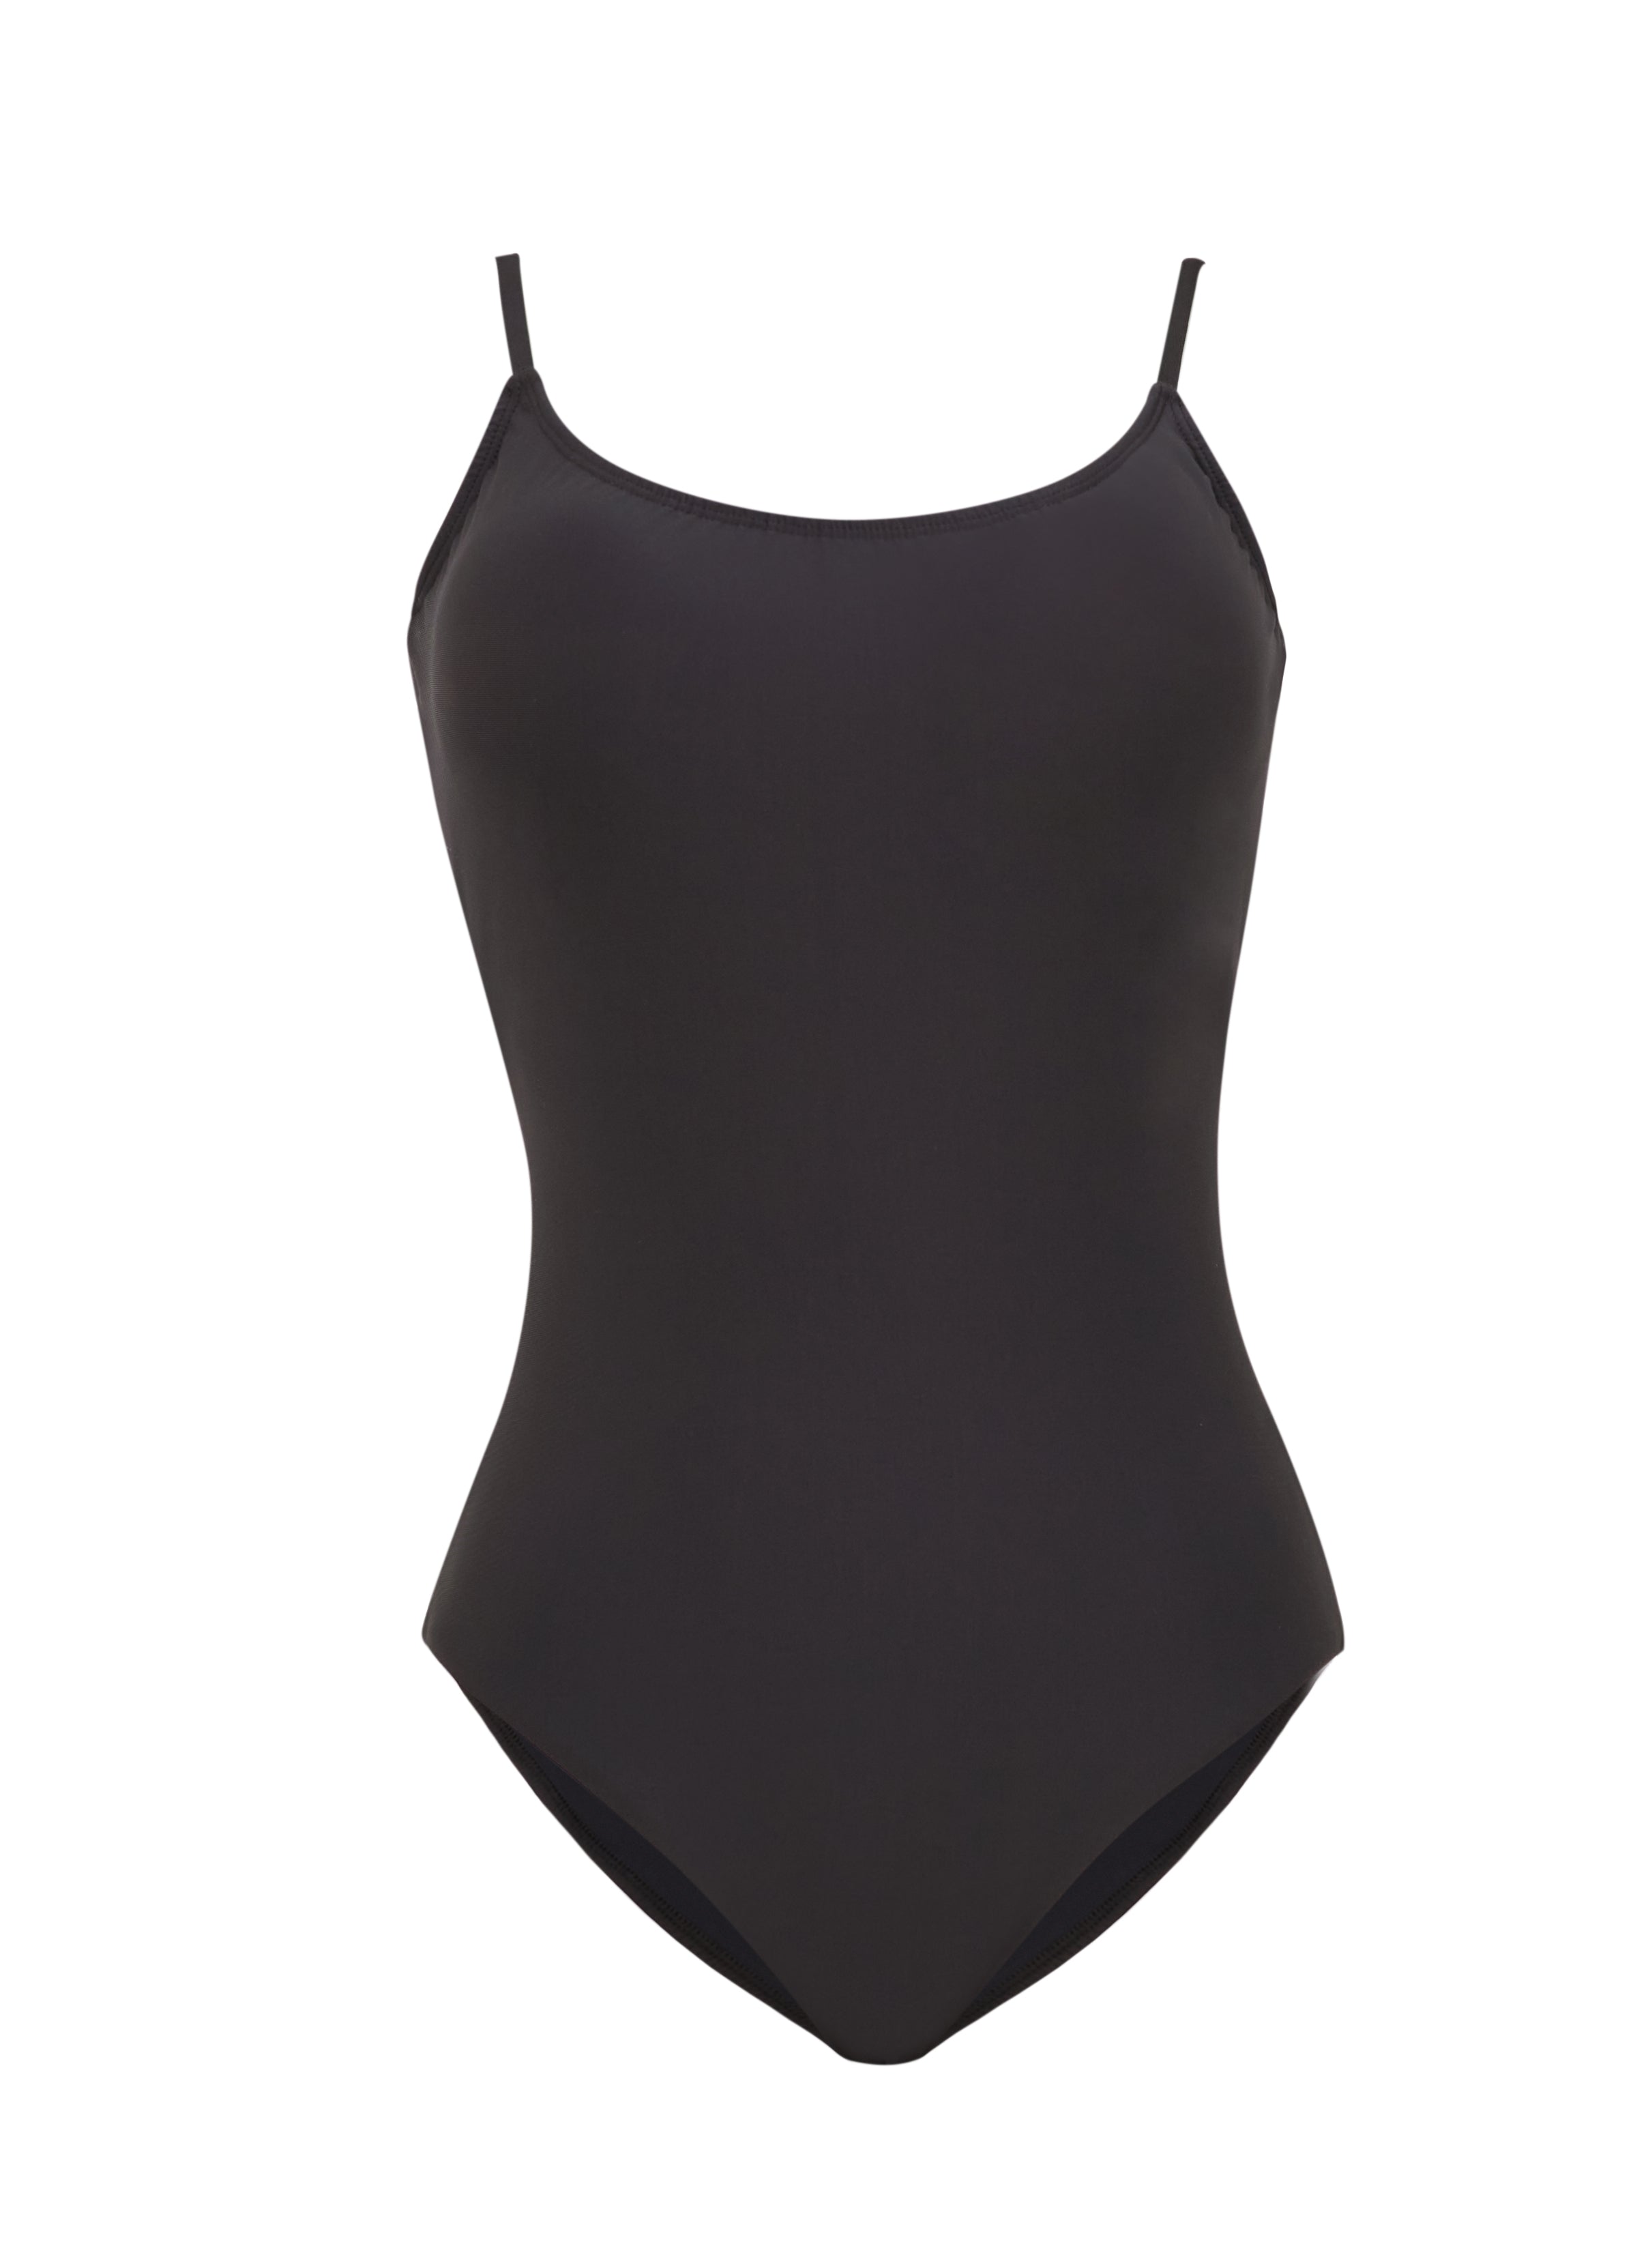 Cecilia One-Piece Swimsuit by Hermoza